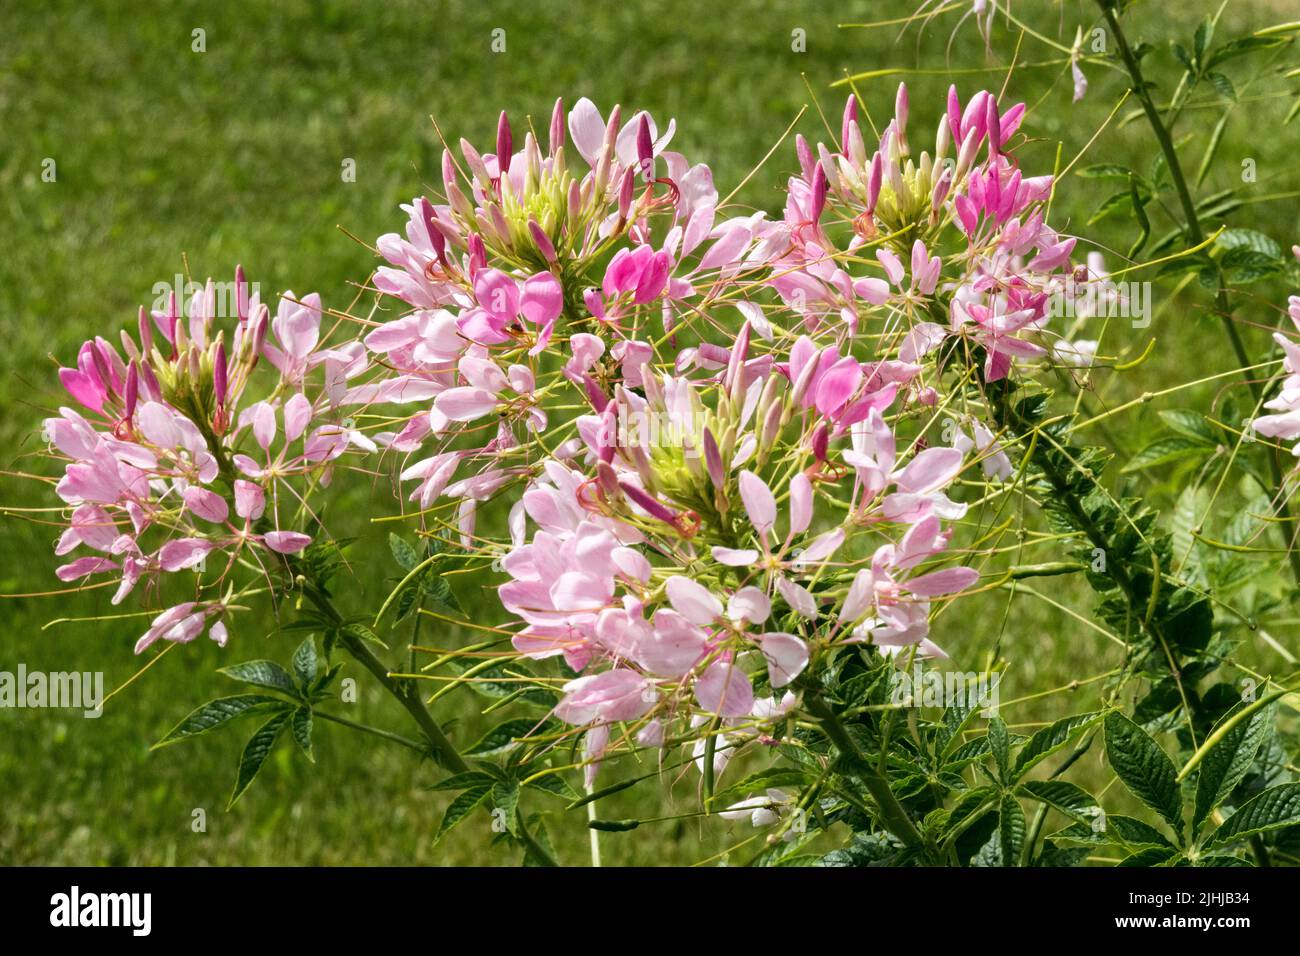 Blooming, Tarenaya, Spider Flower Grandfathers Whiskers, Cleome houtteana, Pink White Flowers aka Cleome guaranitica Herbaceous annual medicinal plant Stock Photo